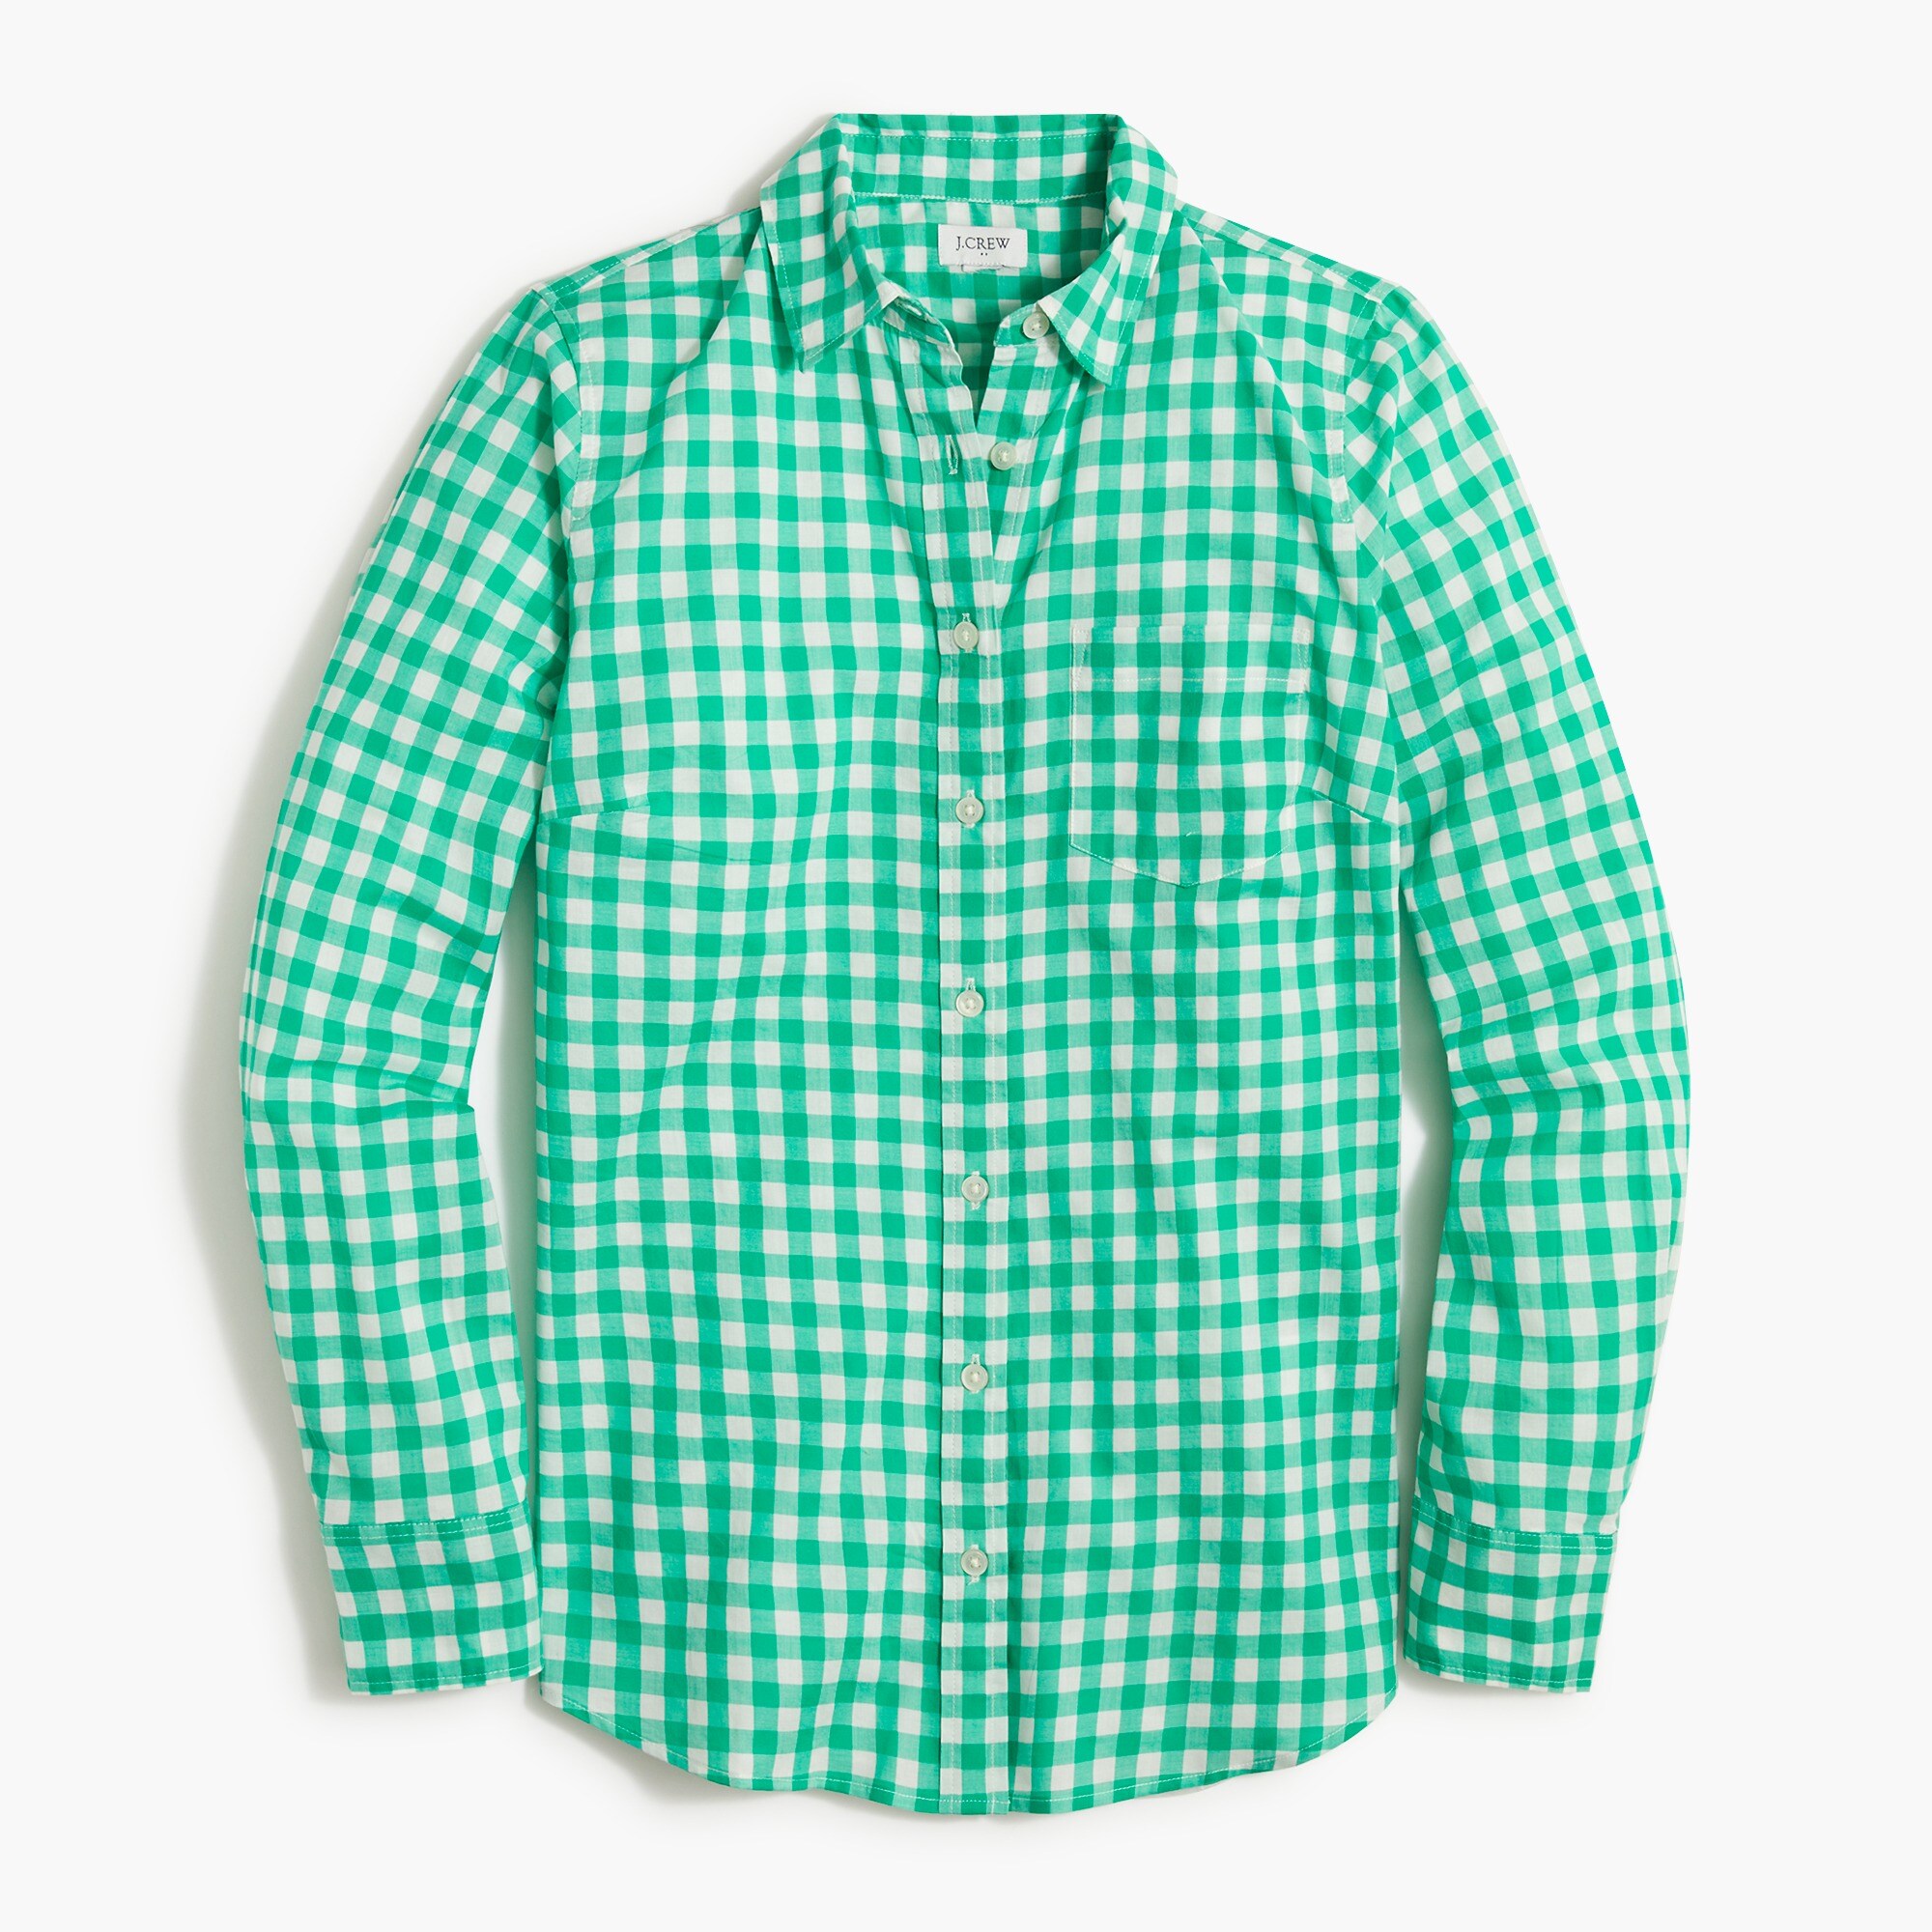  Gingham lightweight cotton shirt in signature fit